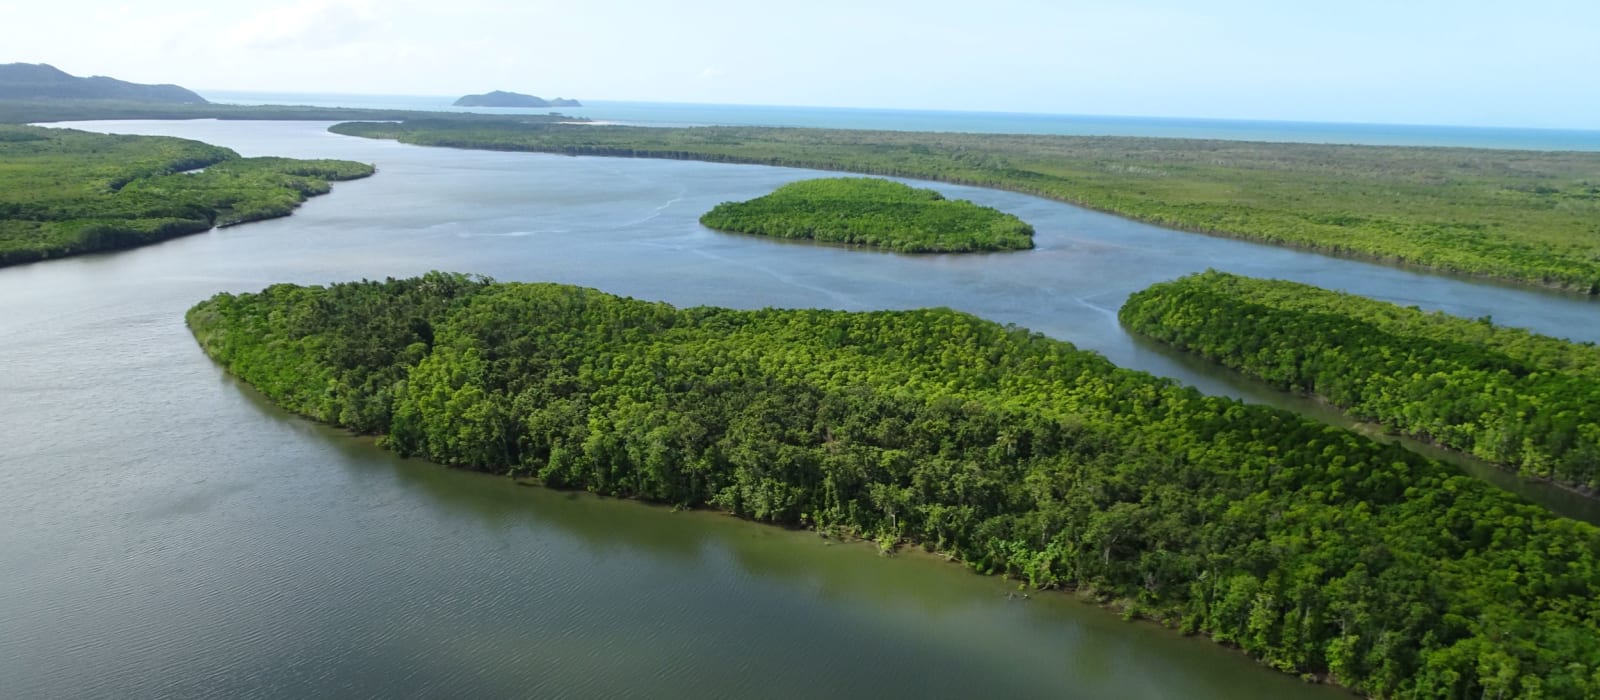 Indigenous land and sea rangers lead work in the Daintree to protect mangrove habitats